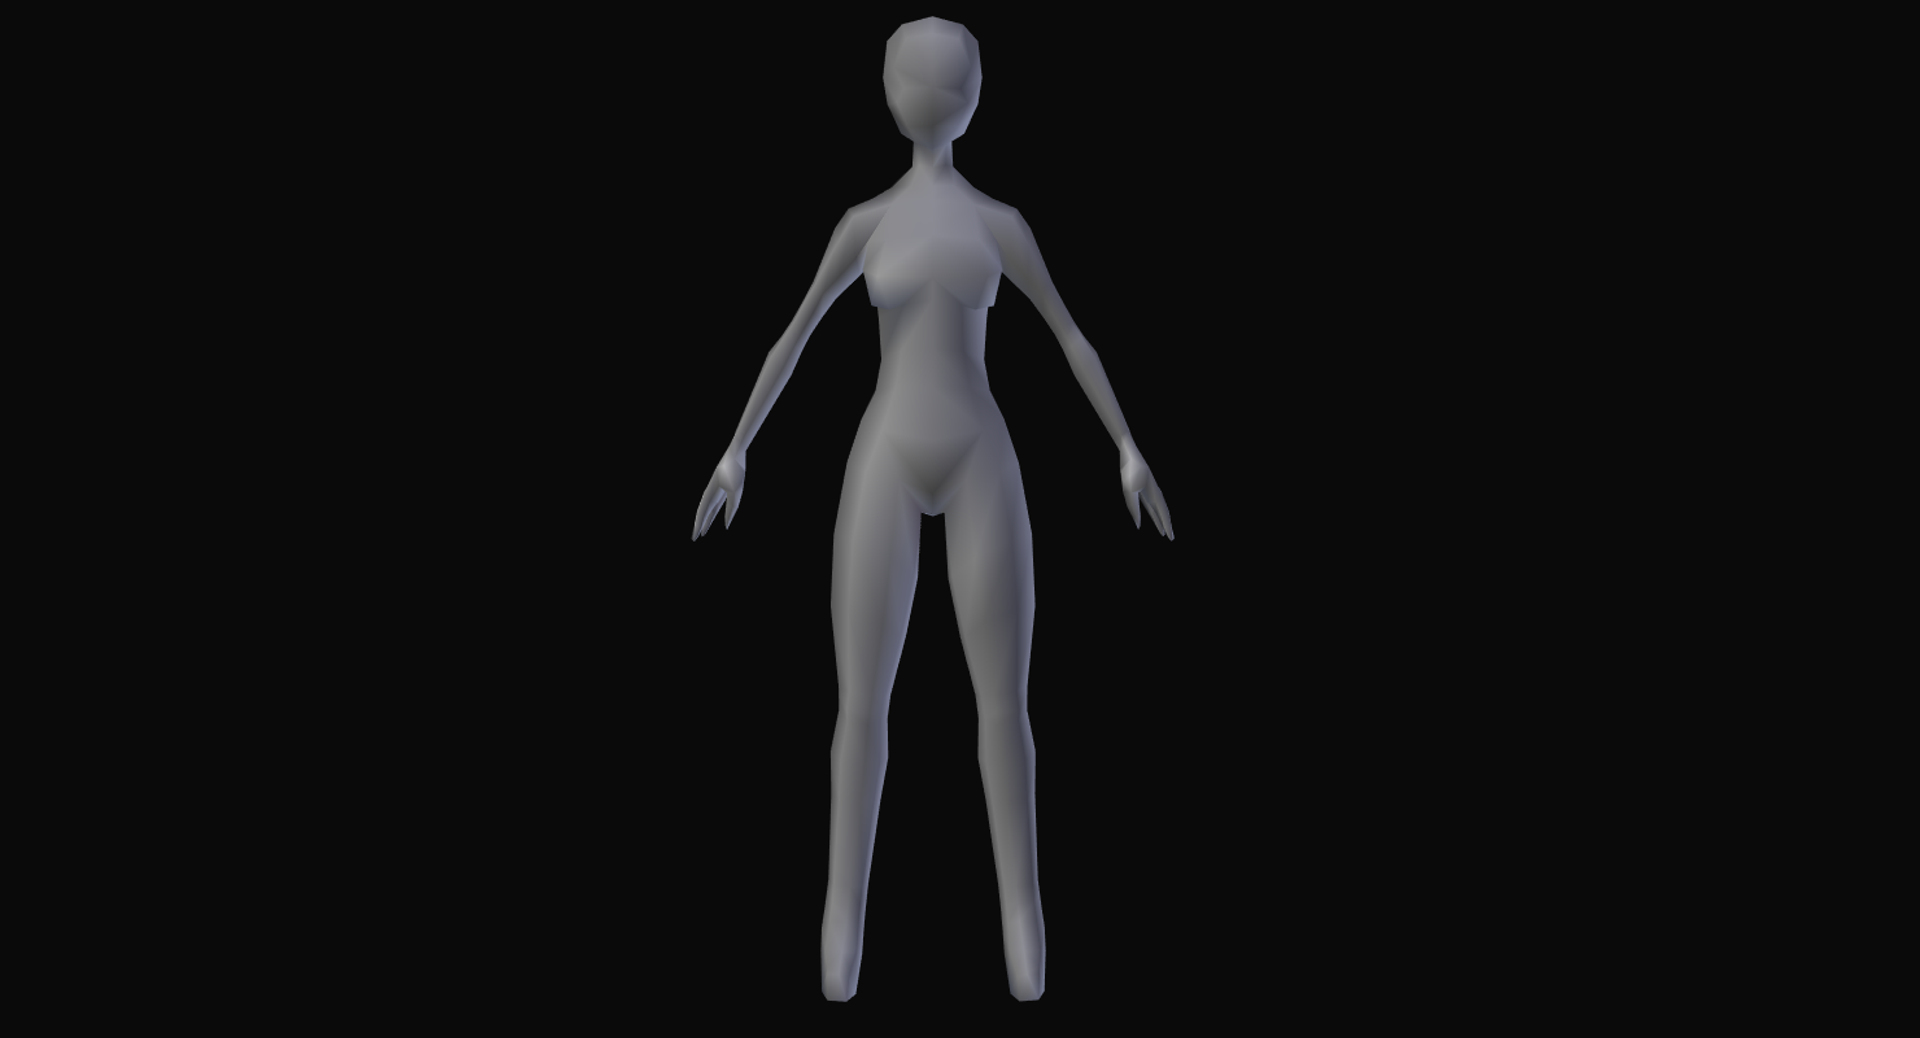 How To Make A Human Male Body Mesh In Blender 2.79 